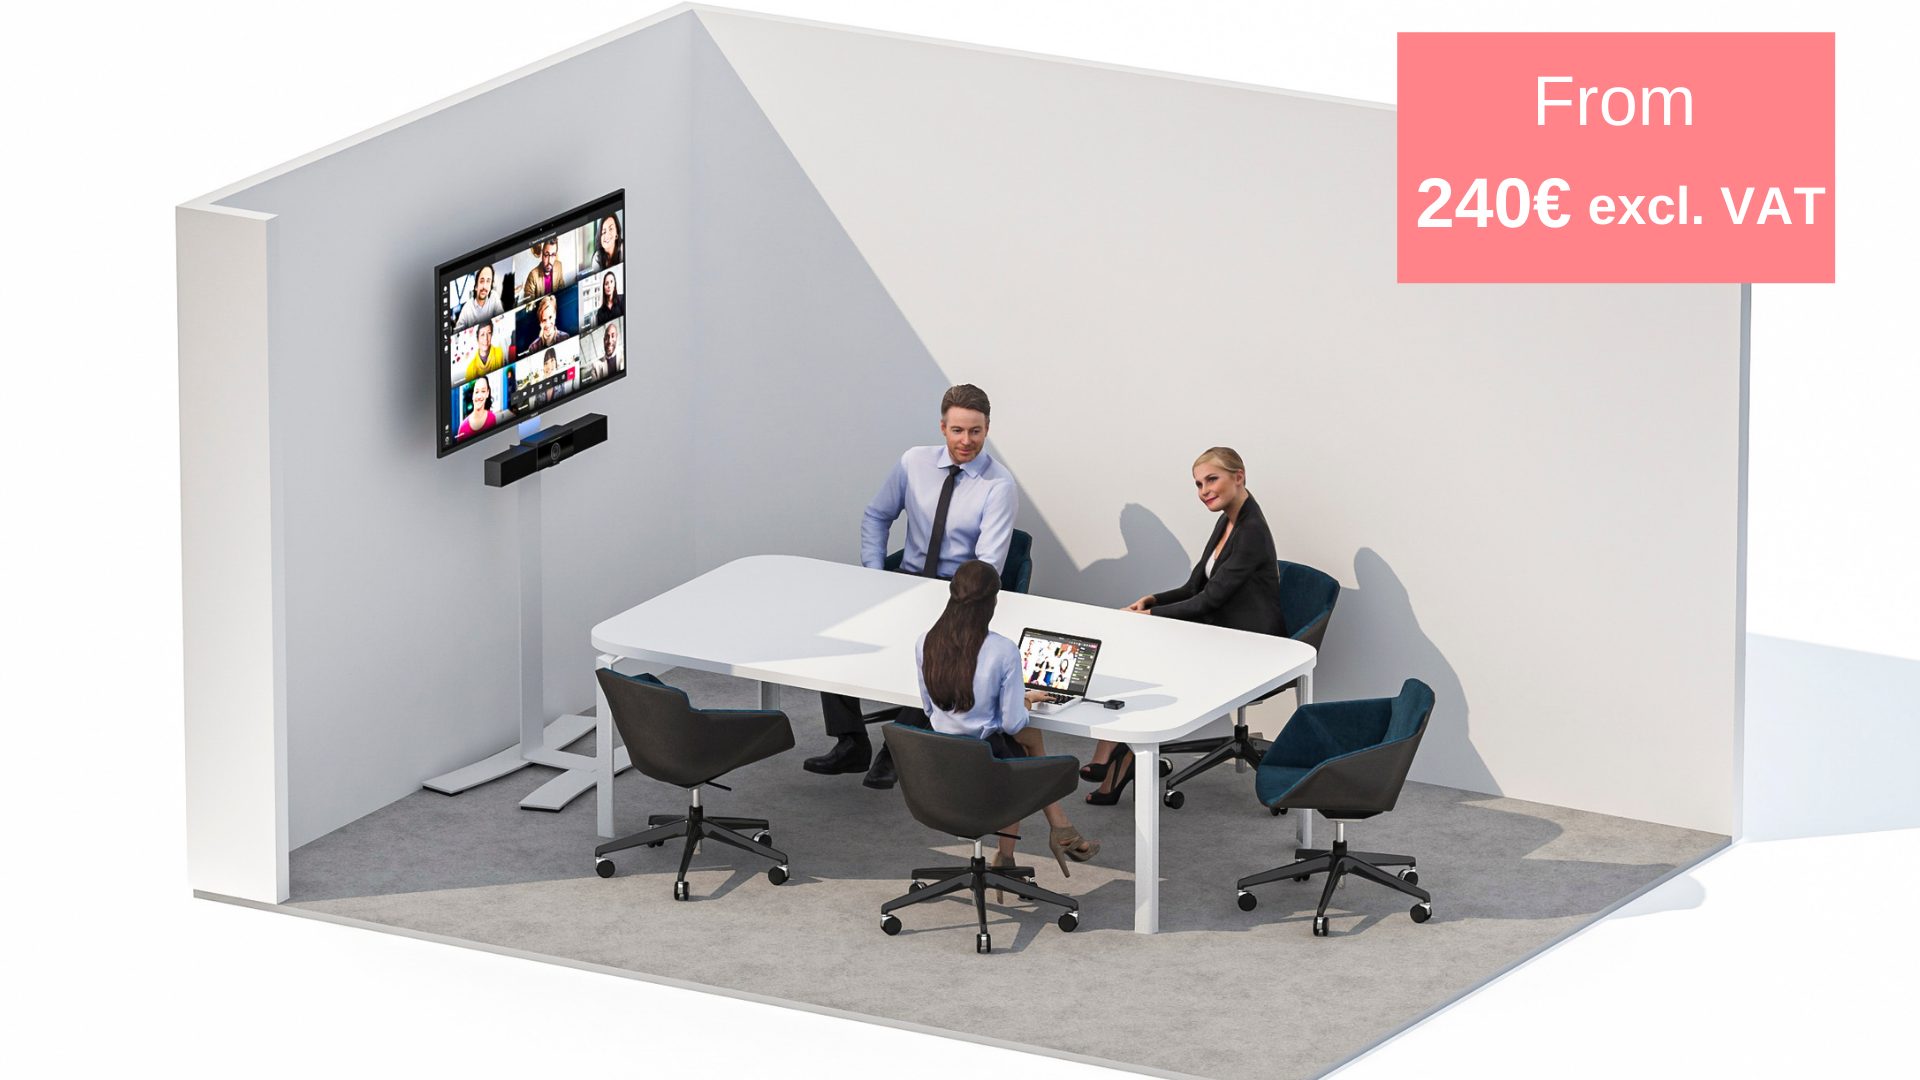 Videlio BYOD Poly meeting rooms